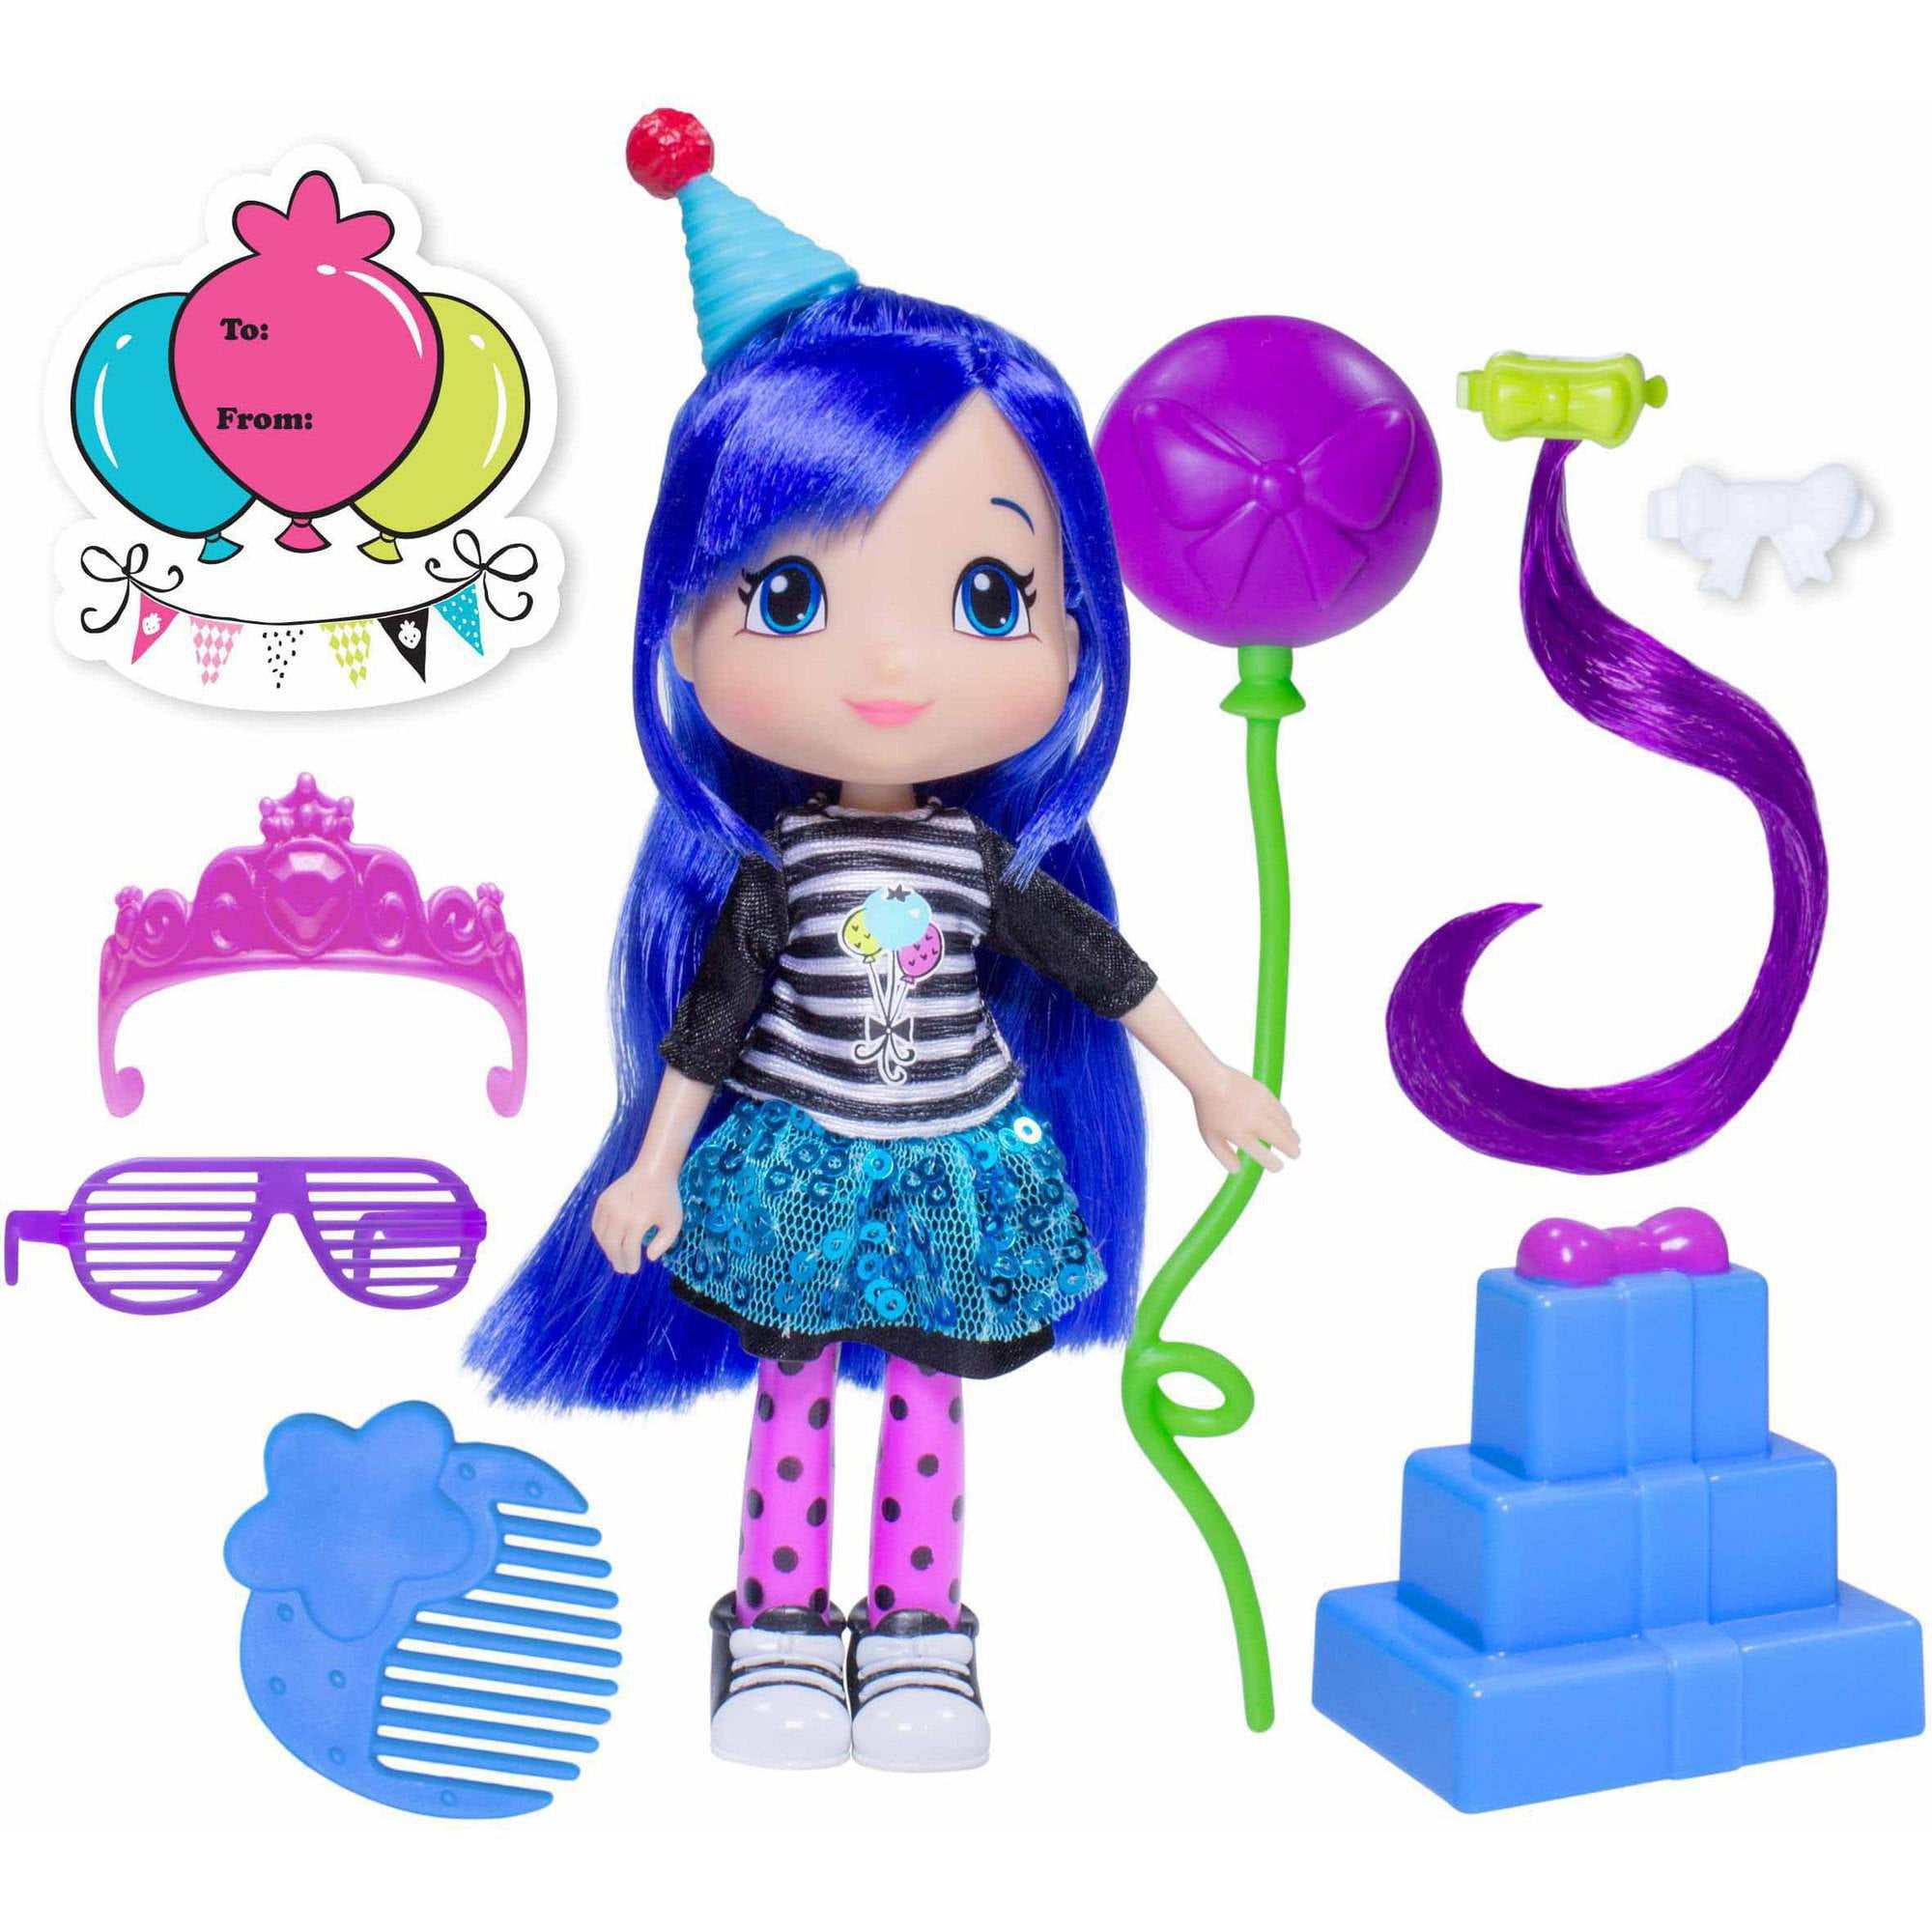 Strawberry Shortcake Surprise Party Doll, Blueberry Muffin 